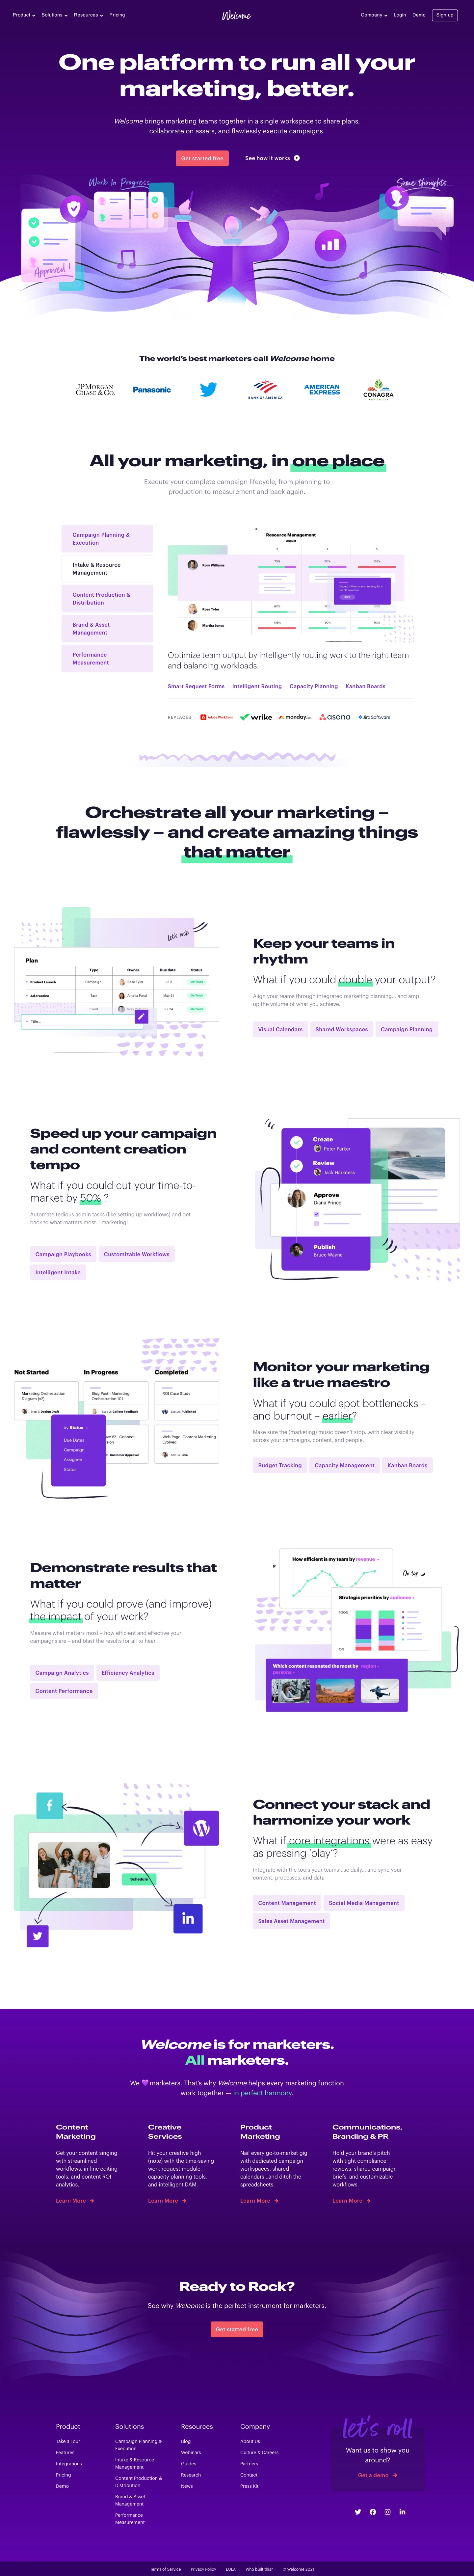 Welcome Software Landing Page Example: One platform to run all your marketing, better. Welcome brings marketing teams together in a single workspace to share plans, collaborate on assets, and flawlessly execute campaigns.